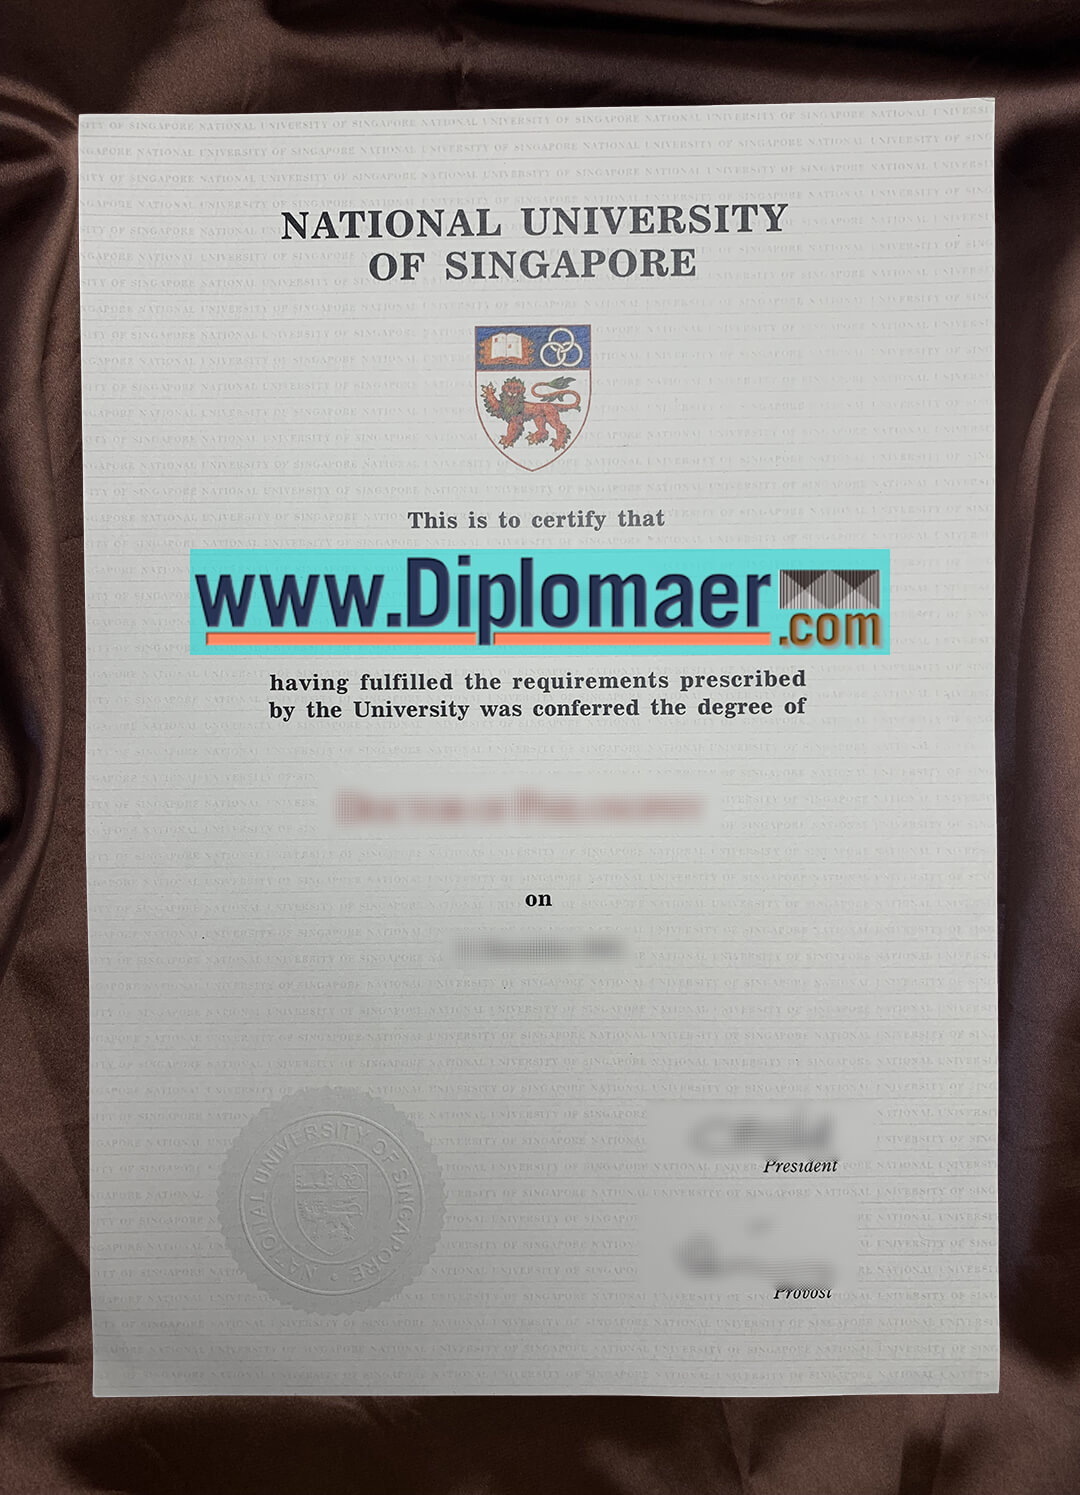 National University of Singapore Fake Diploma - How long does it take to buy the National University of Singapore fake diploma online?